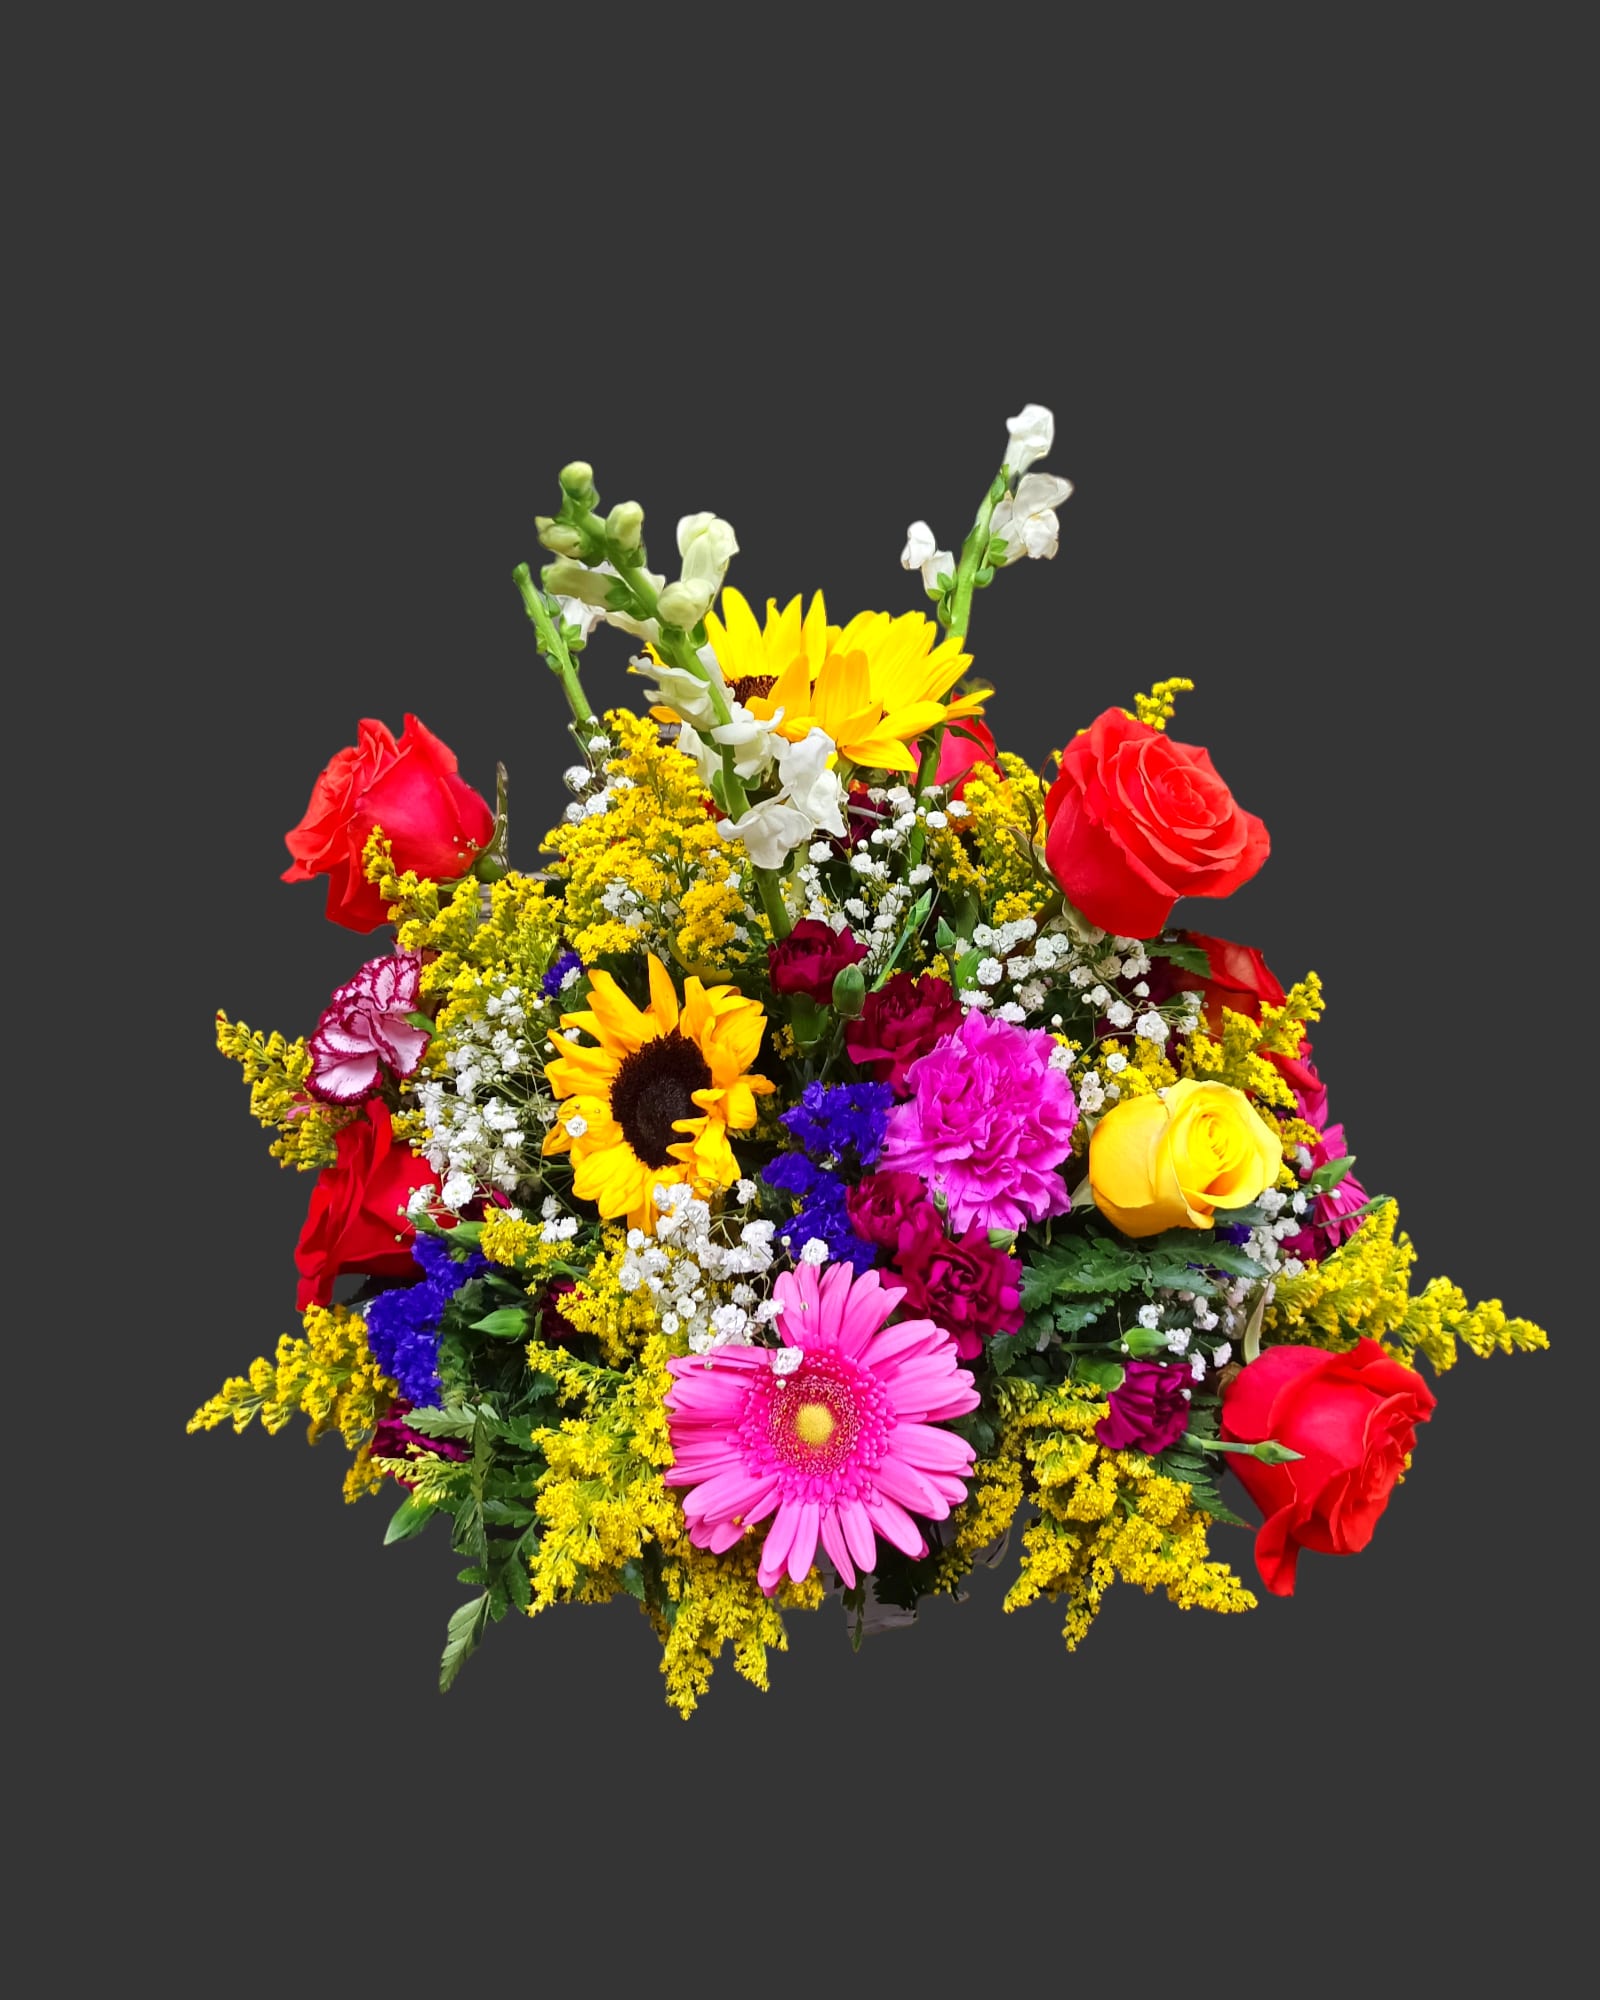 Nice mixed spring floral centerpiece - nice mix of spring flowers in a basket. Mix of sunflowers, white snapdragons, yellow solidago fillers, pink carnations, red roses, purple carnations,pink gerberas, purple statice, and baby's breath.